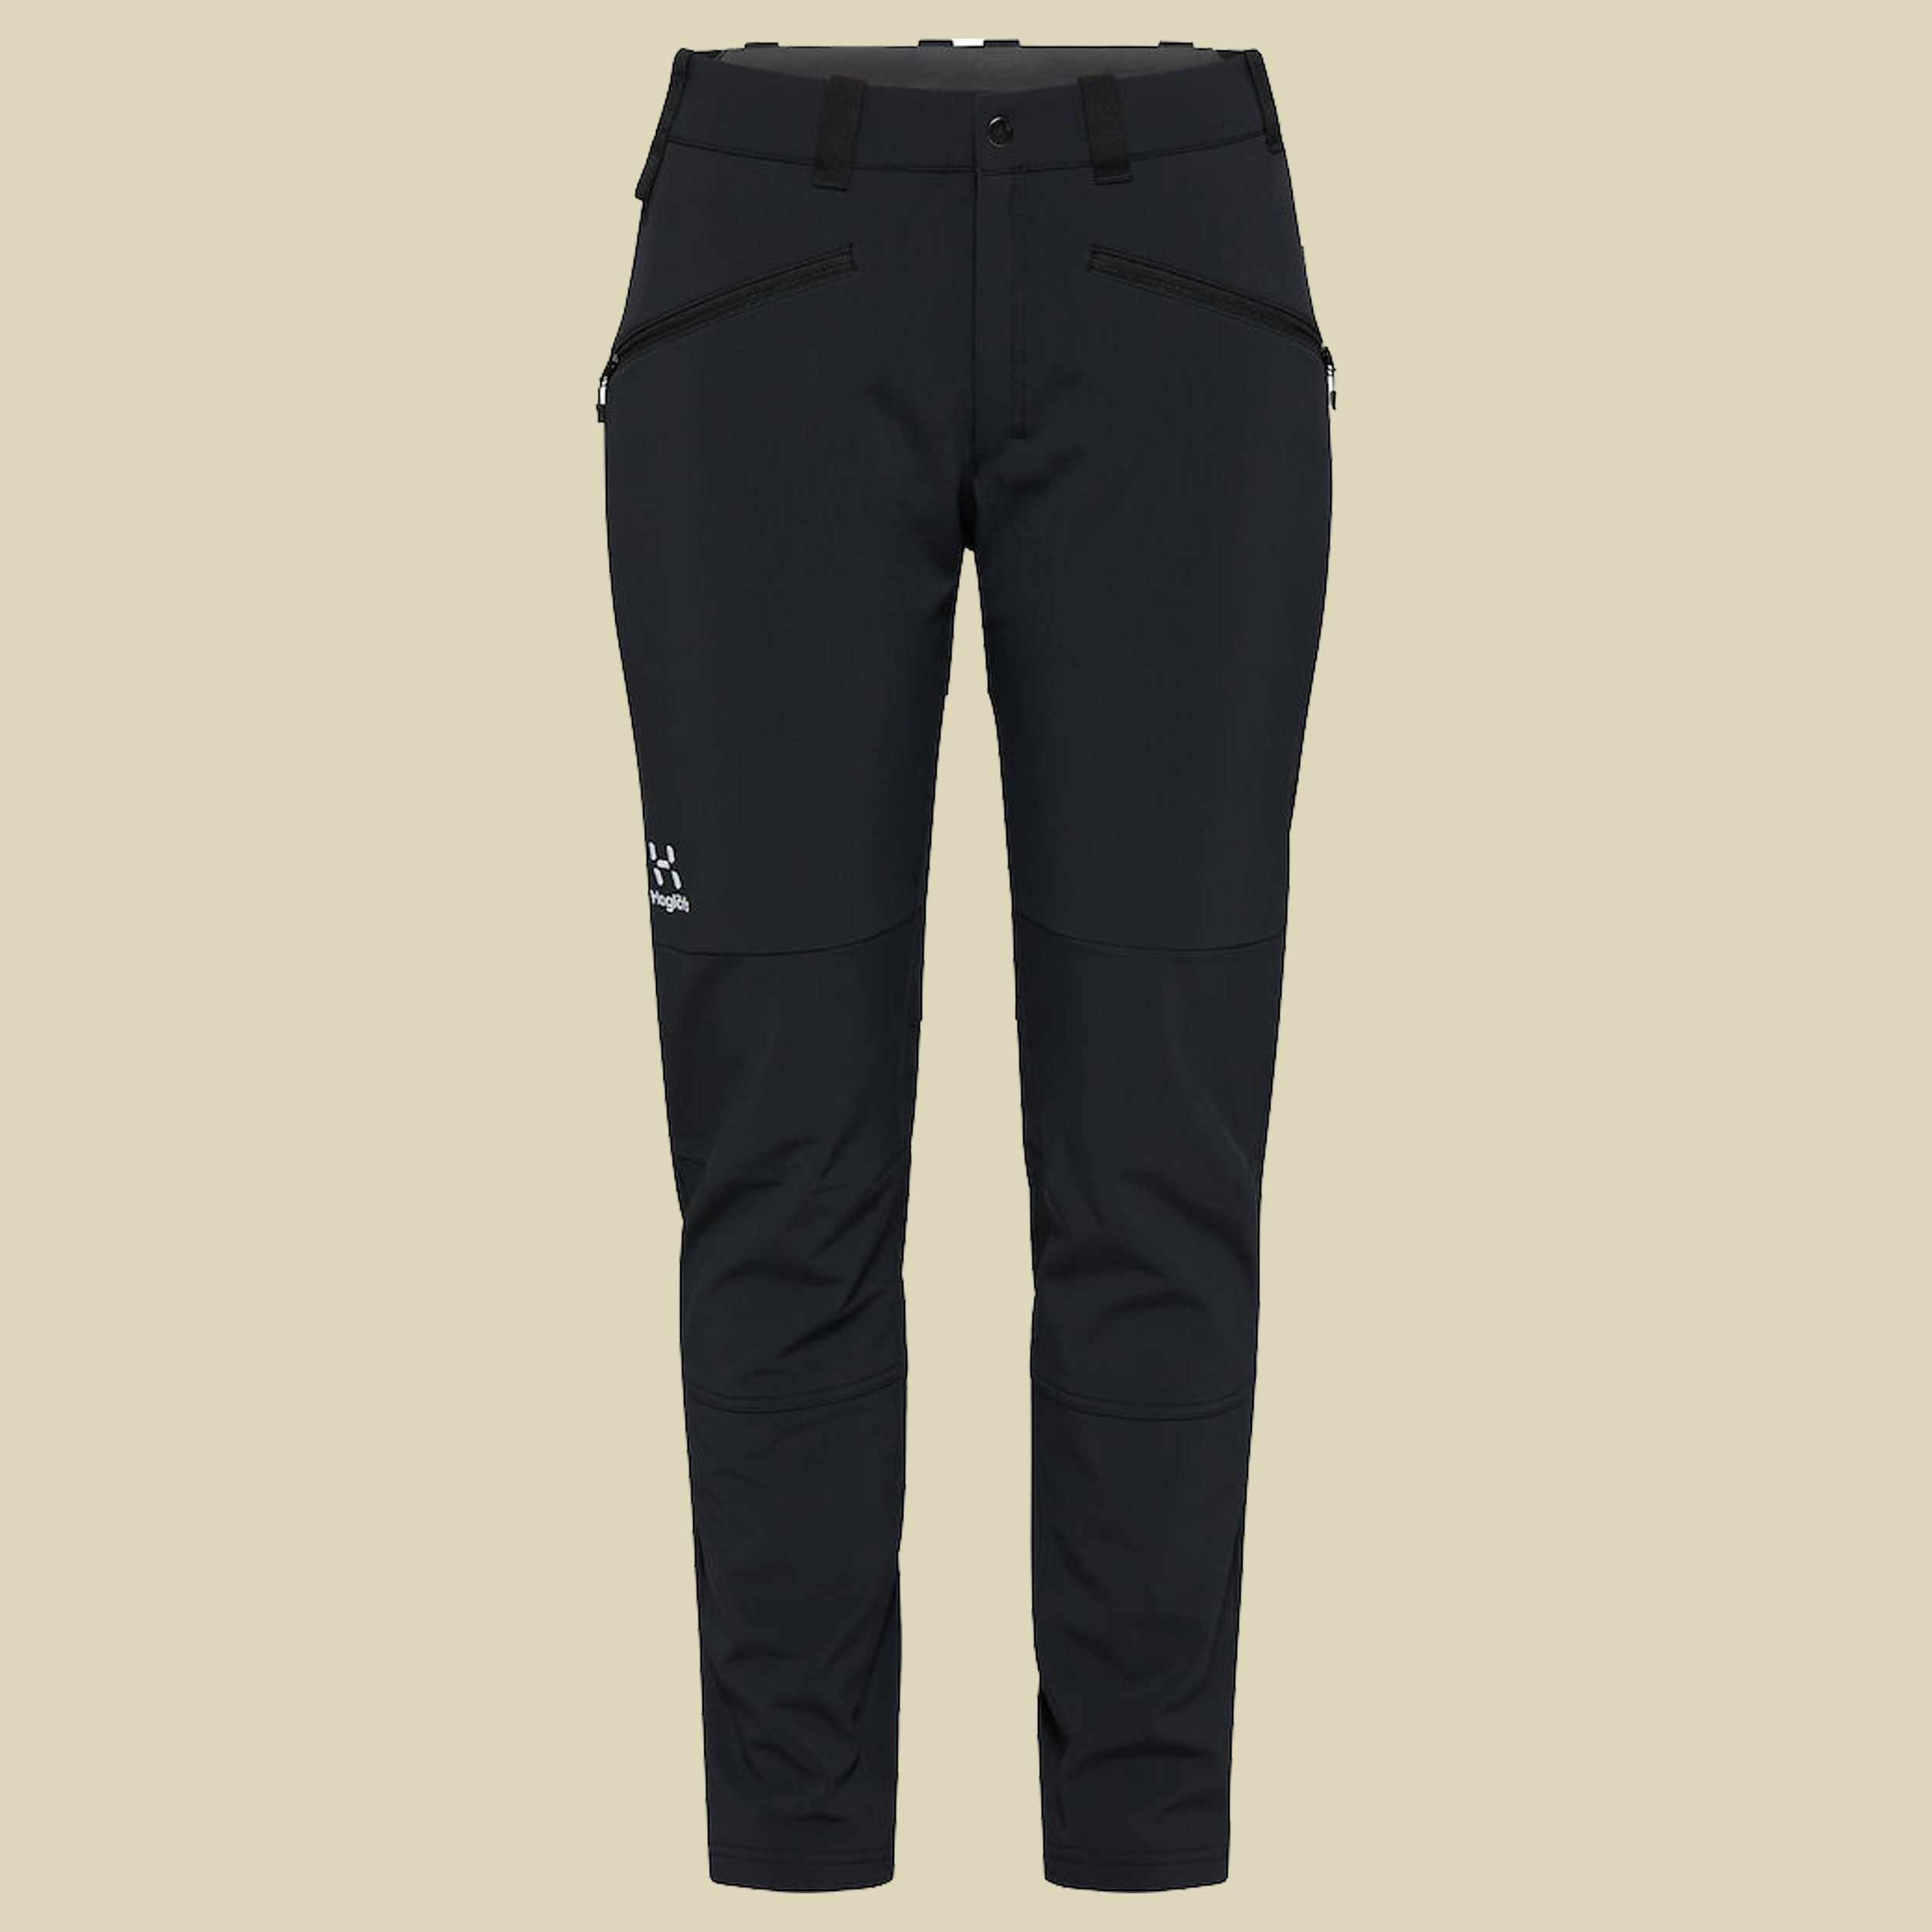 Chilly Softshell Pant Women